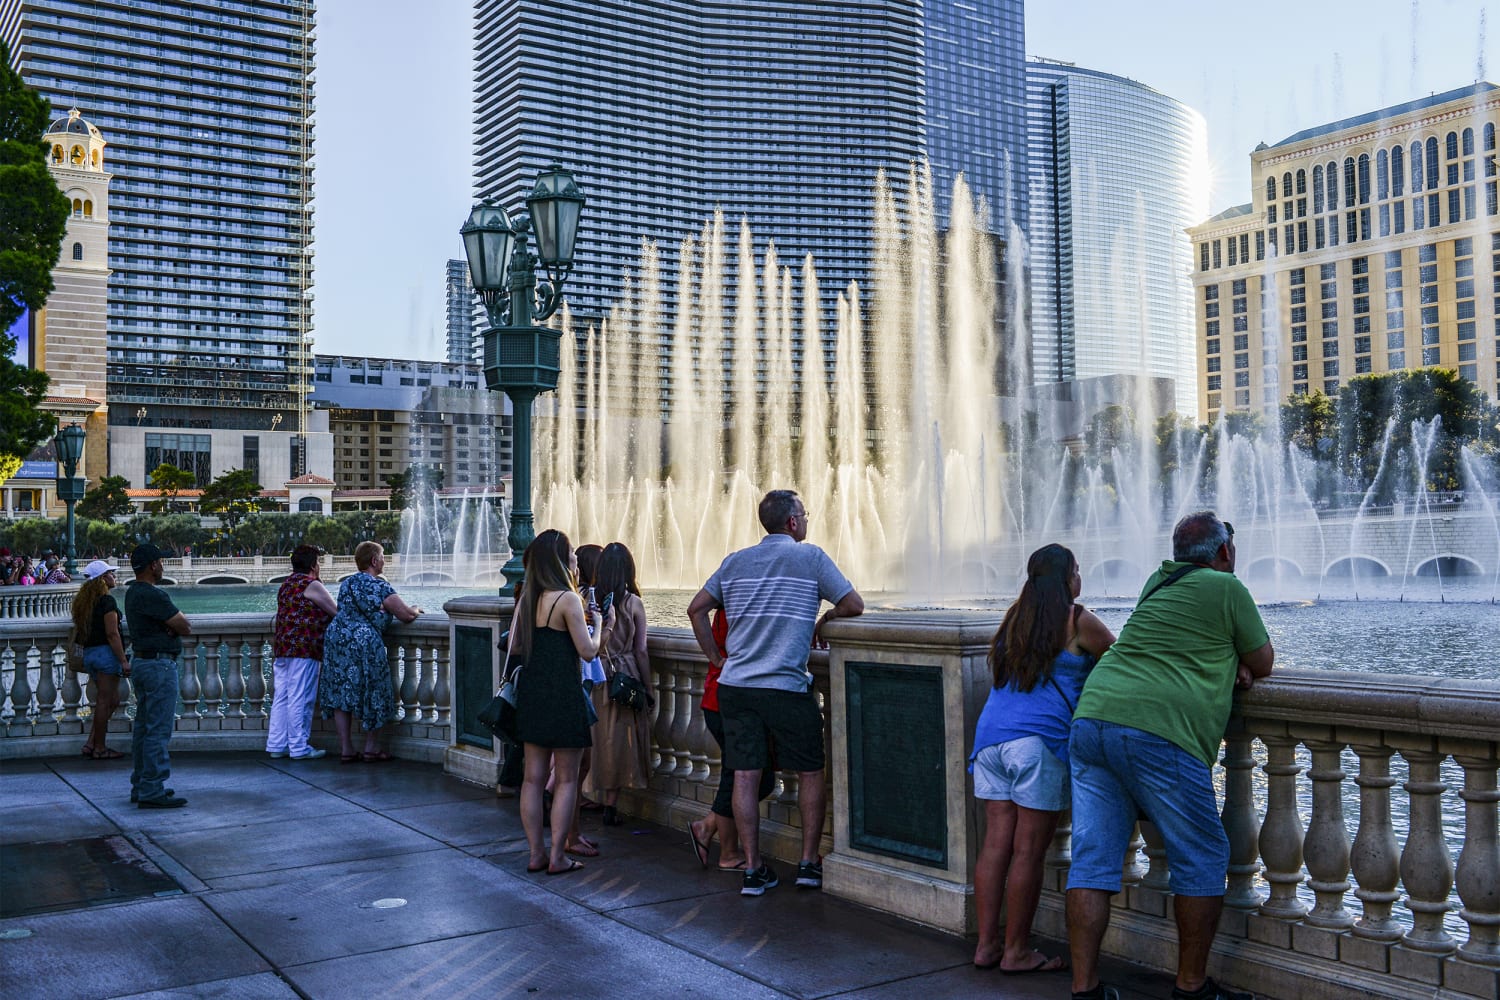 Coming soon to the Las Vegas Strip: Drought rules barring